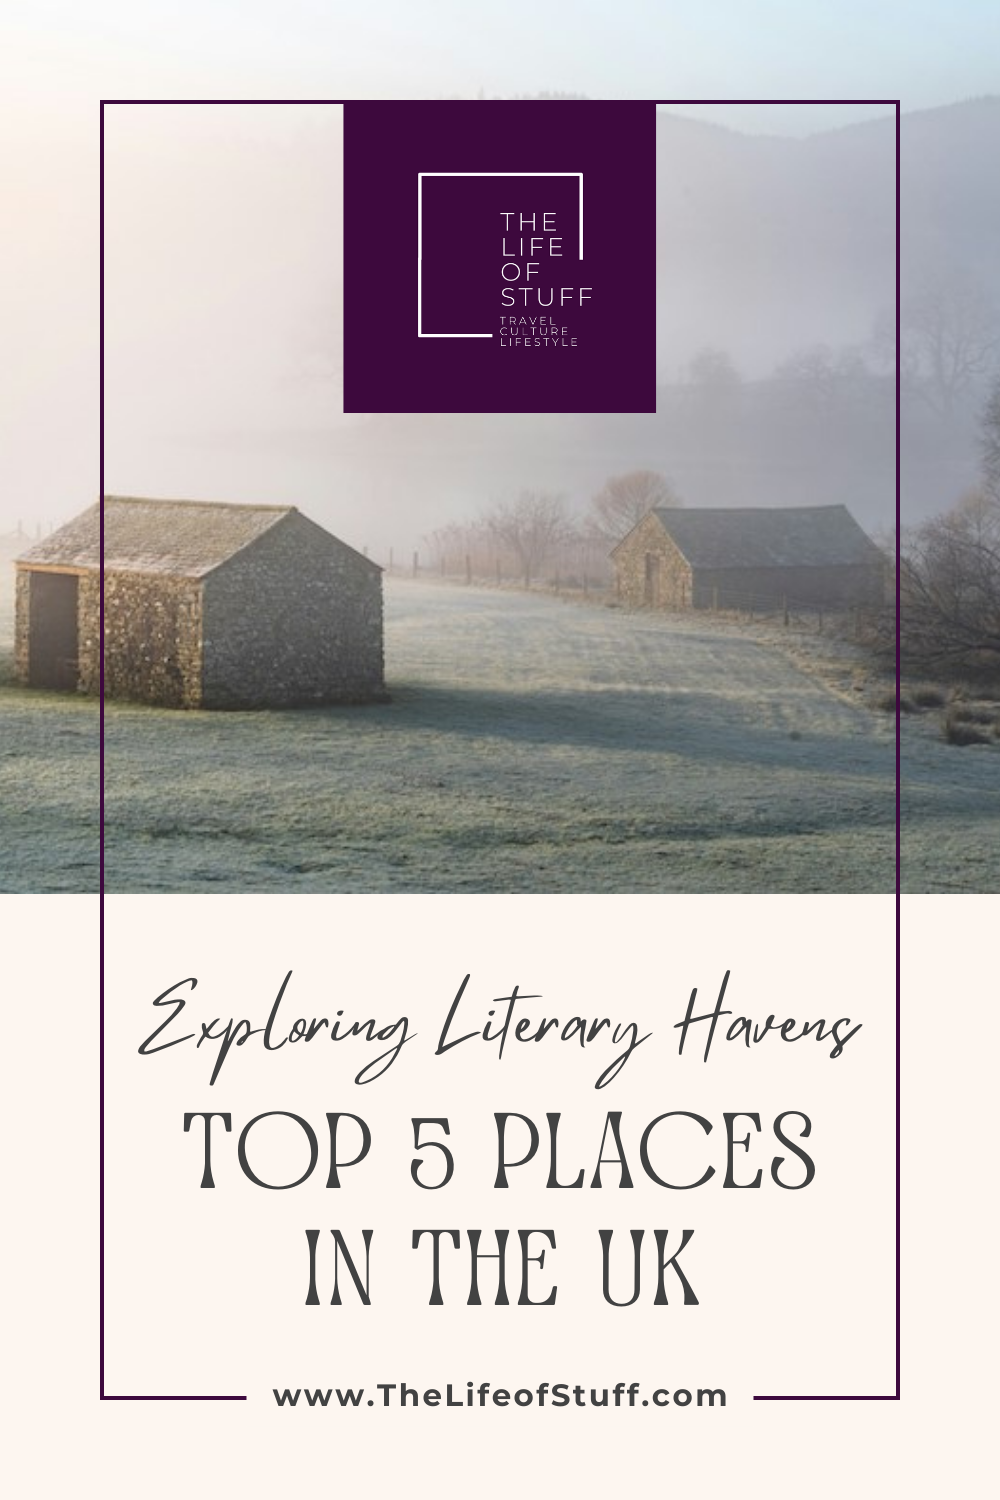 Exploring Literary Havens - Top 5 Places in the UK - The Life of Stuff